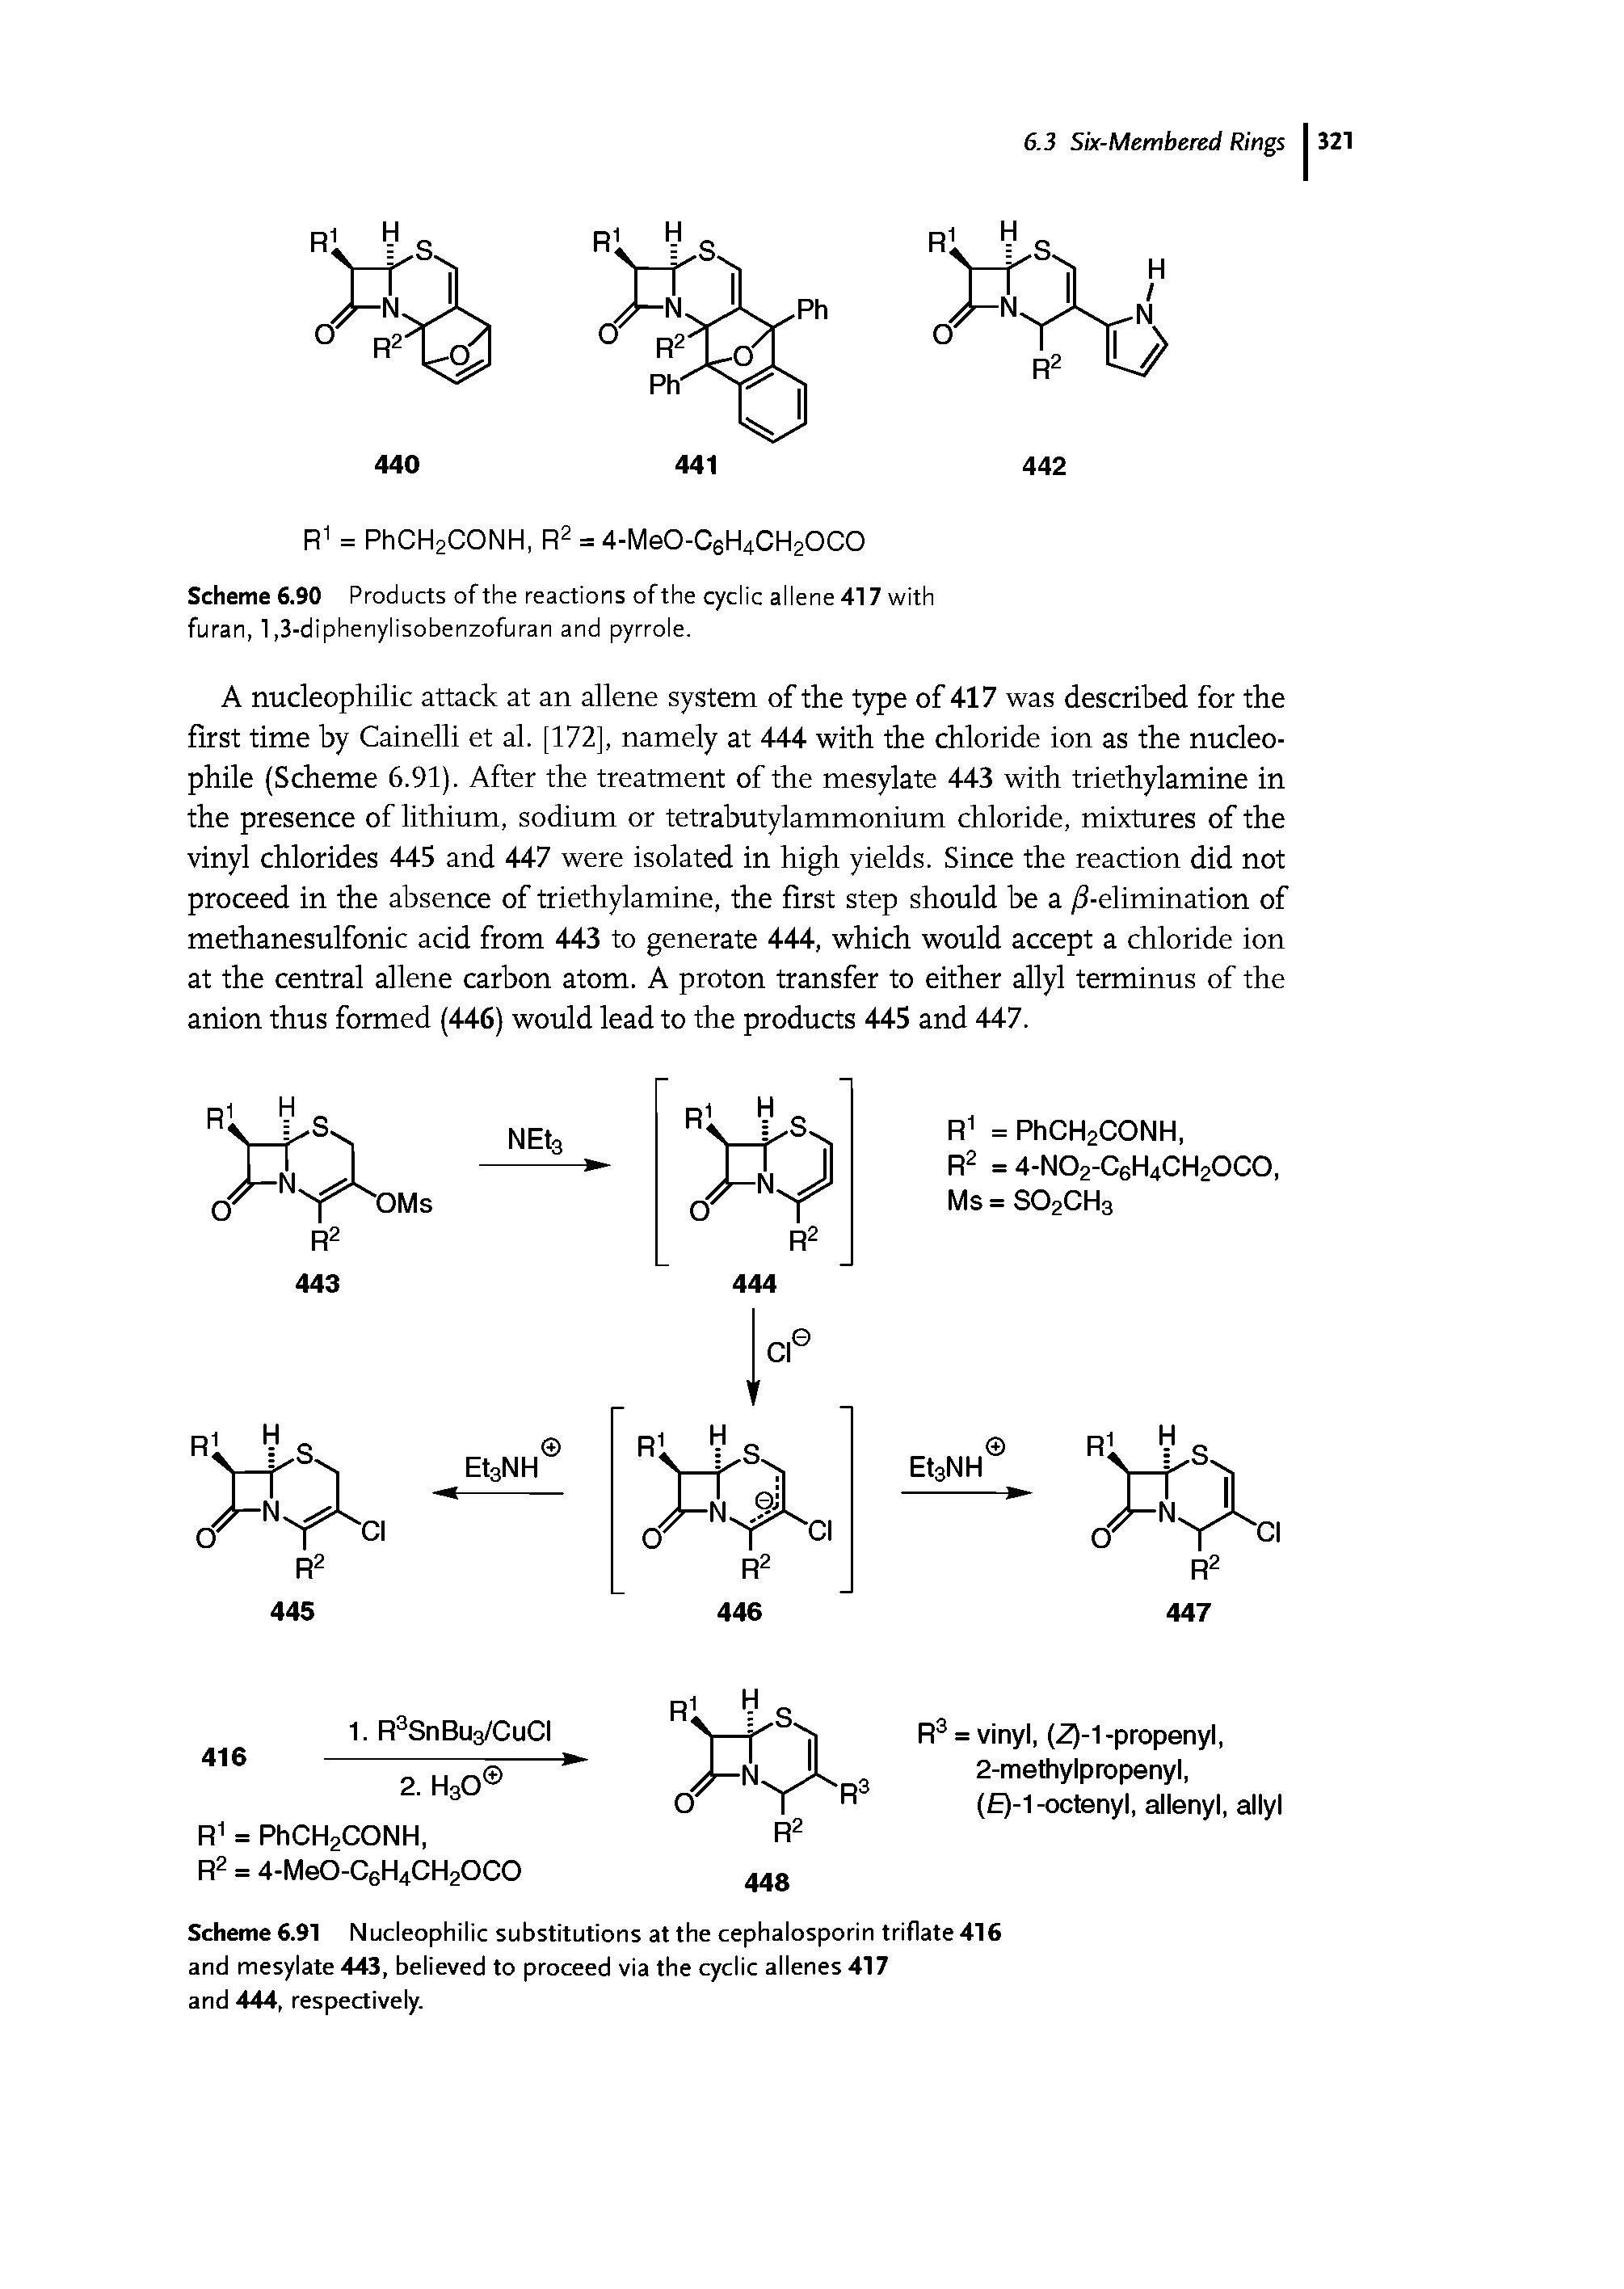 Scheme 6.90 Products of the reactions ofthe cyclic allene 417 with furan, 1,3-diphenylisobenzofuran and pyrrole.